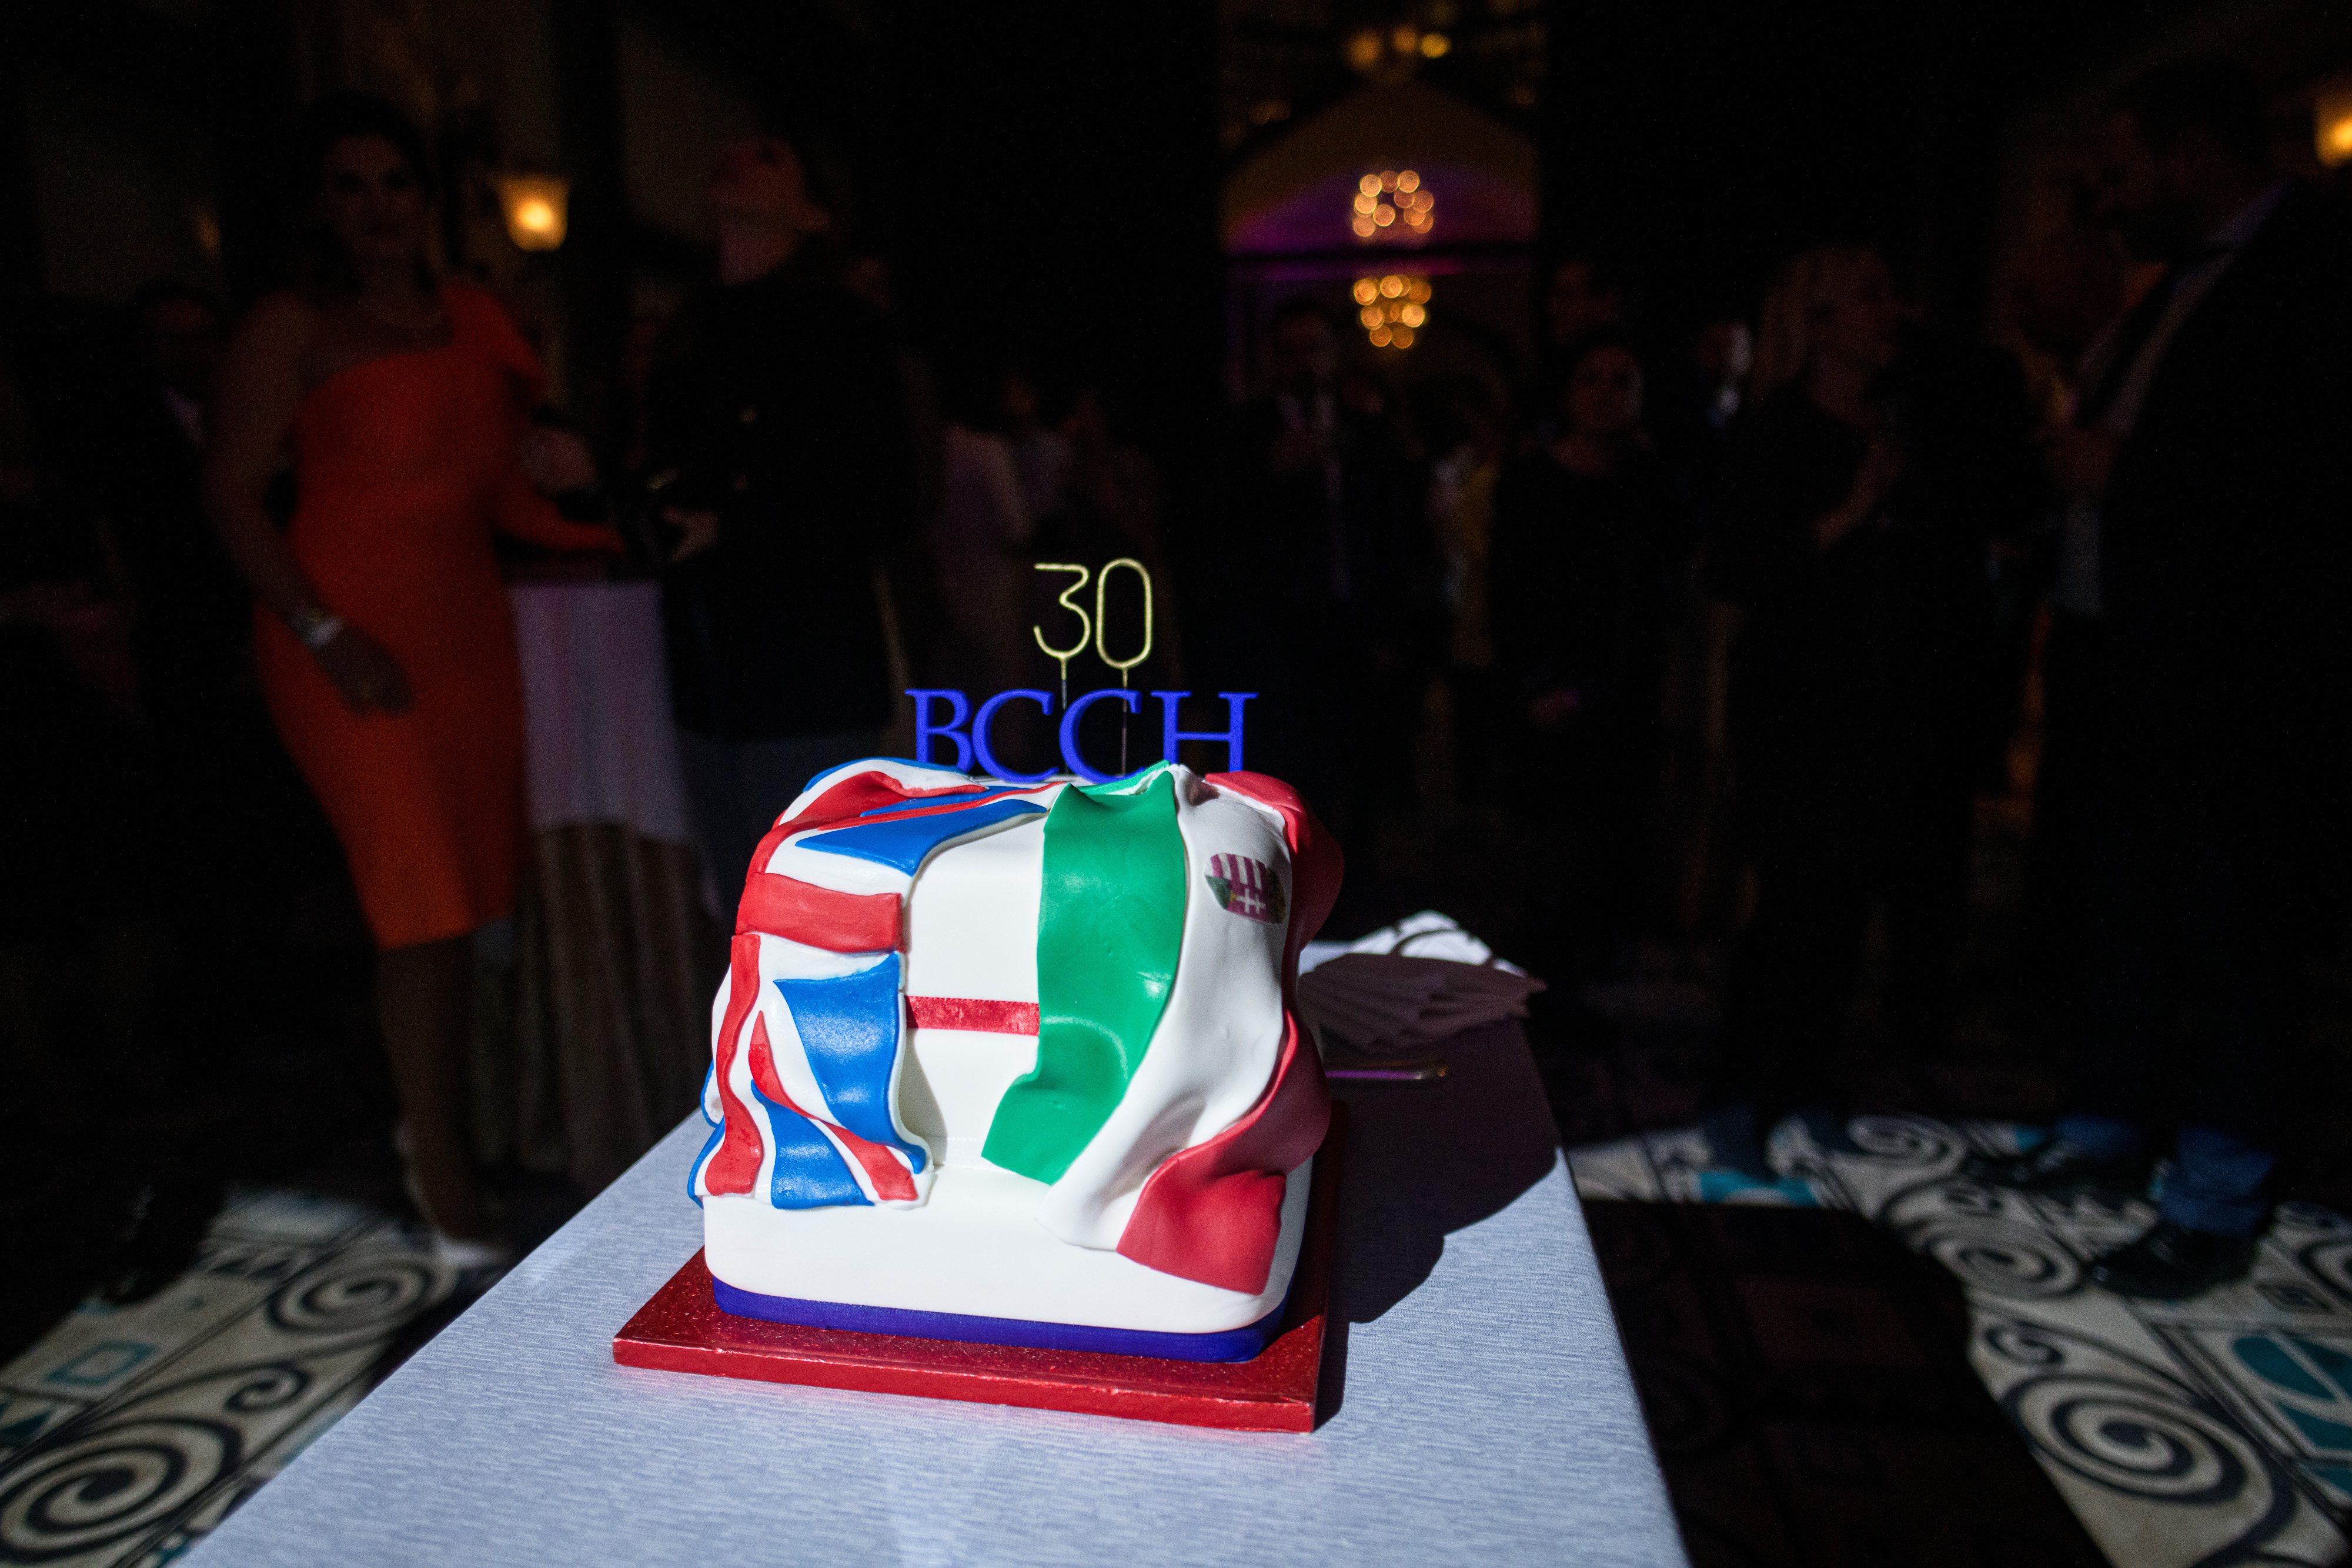 Gala Marks 30 Years of BCCH Supporting Business in Hungary